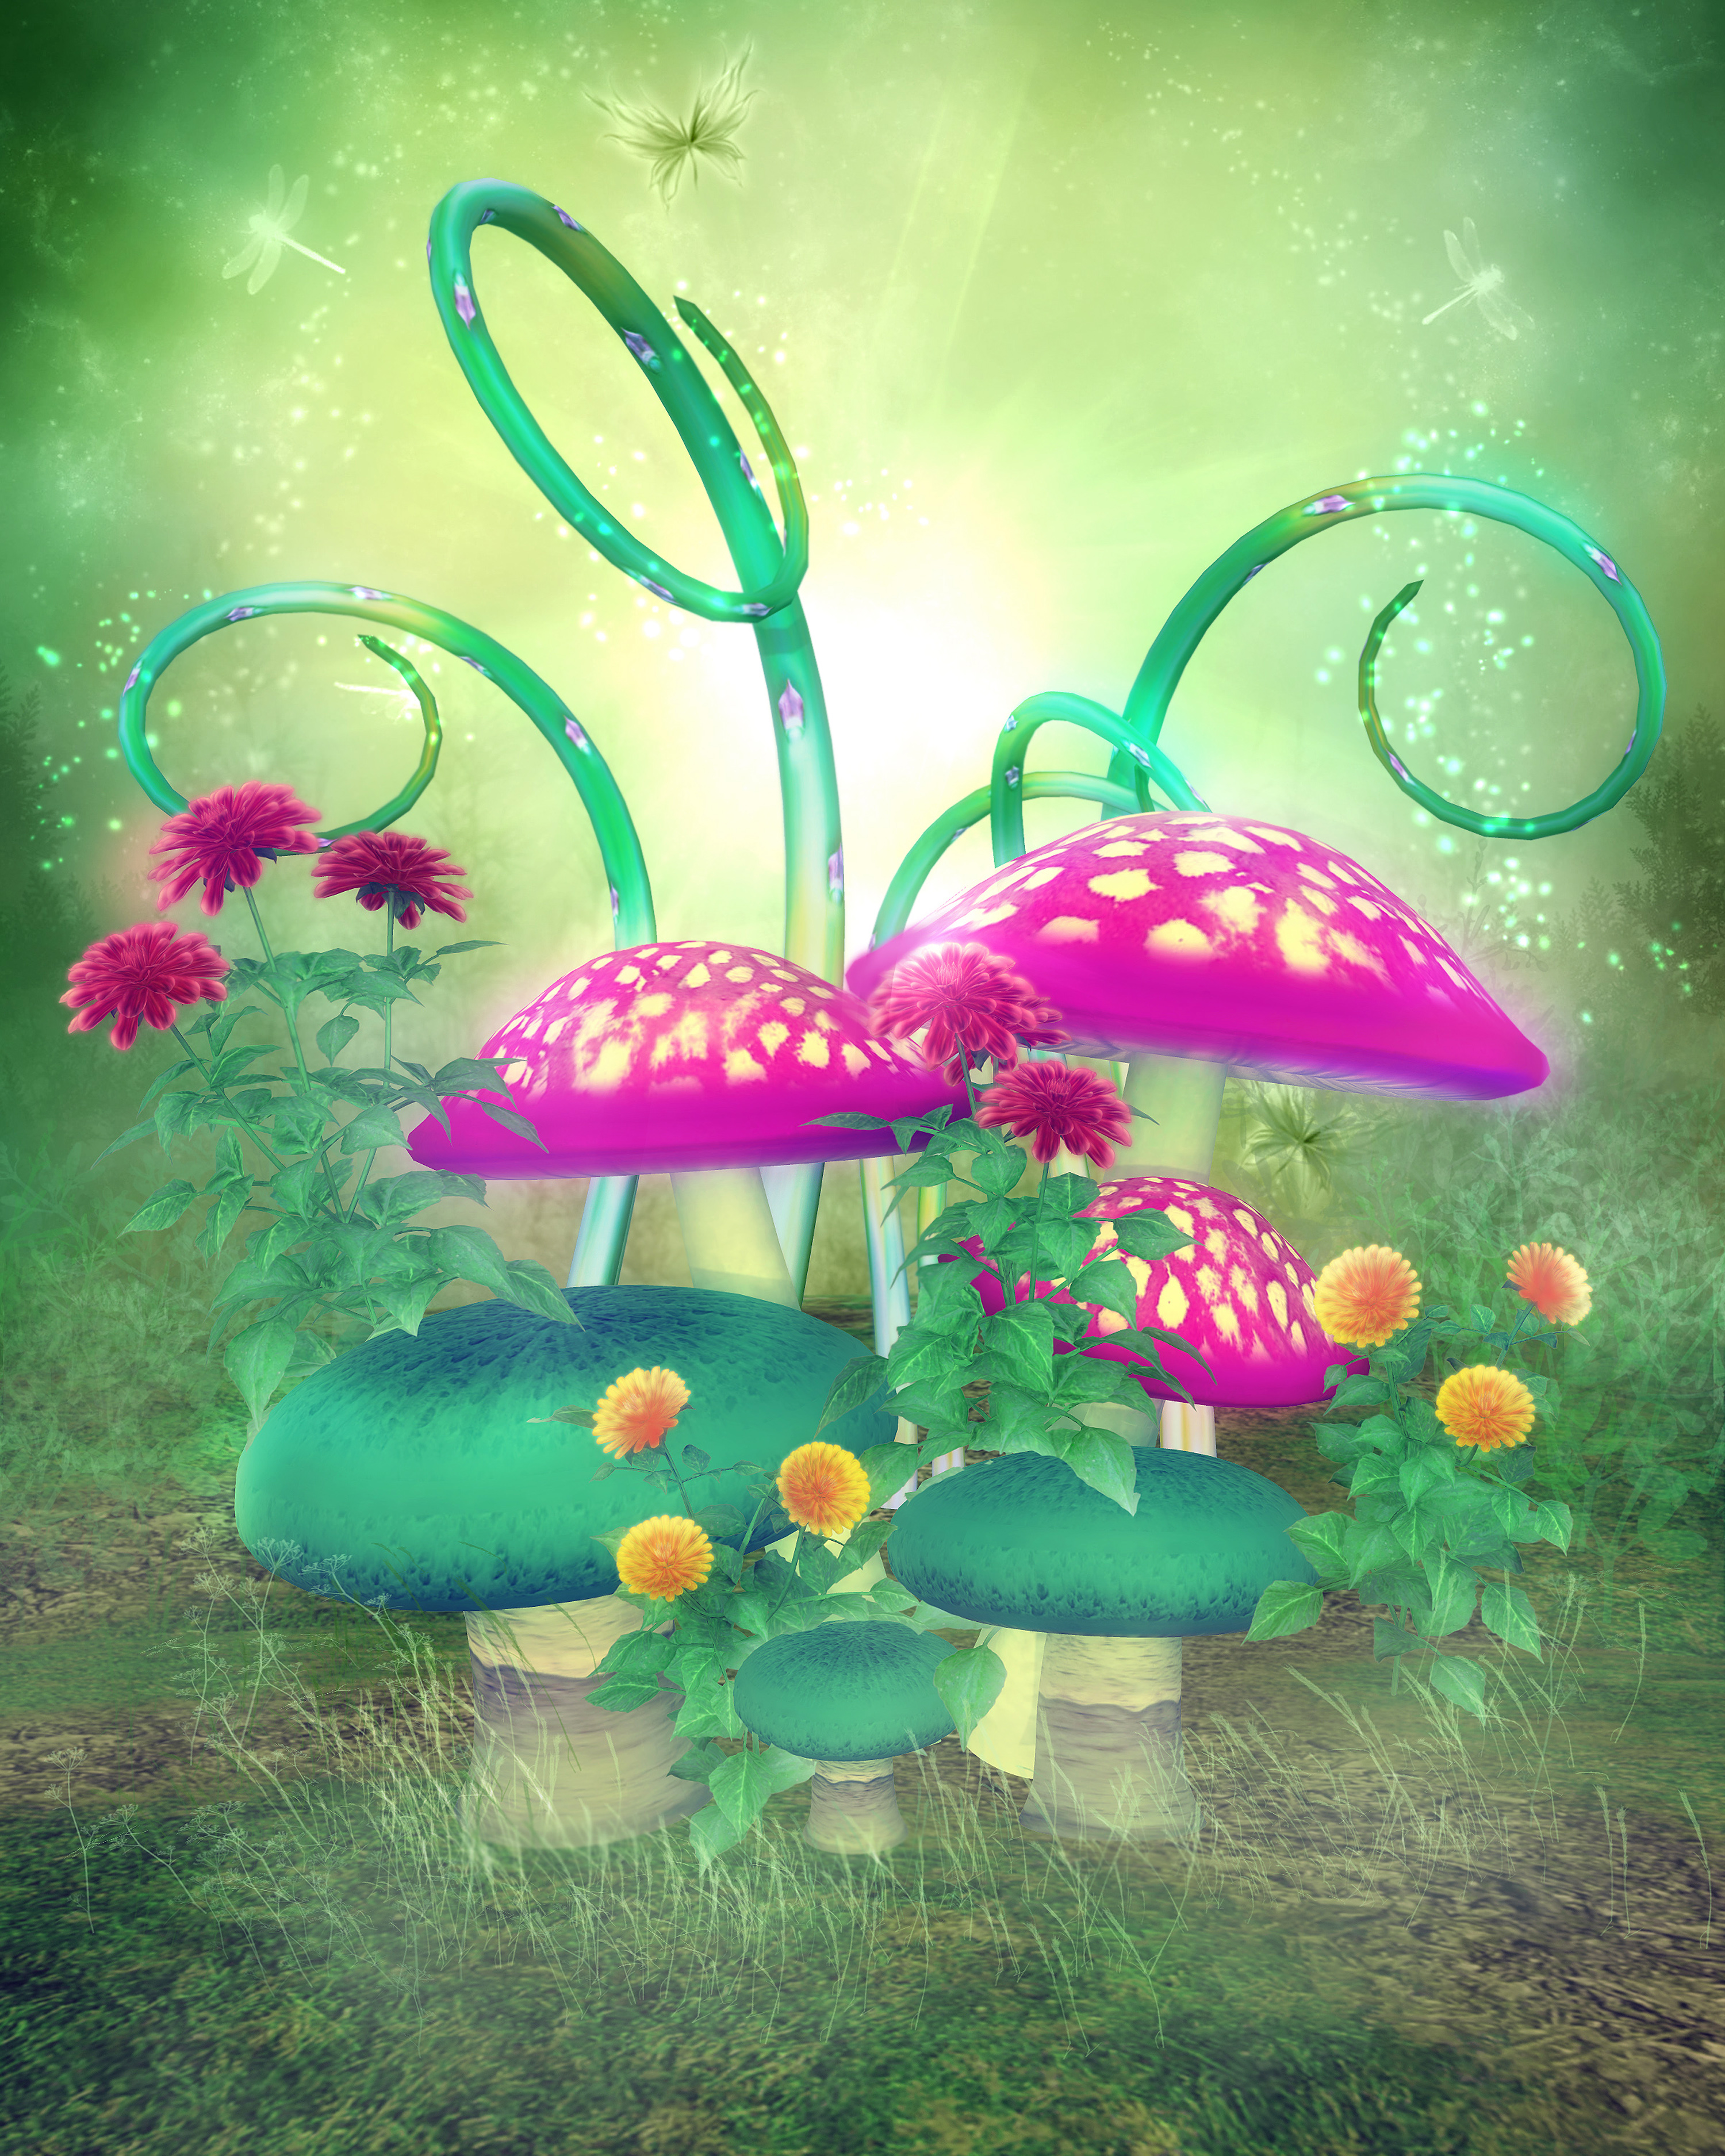 Magic backgrounds with mushrooms Part 2 - 1 10.jpg